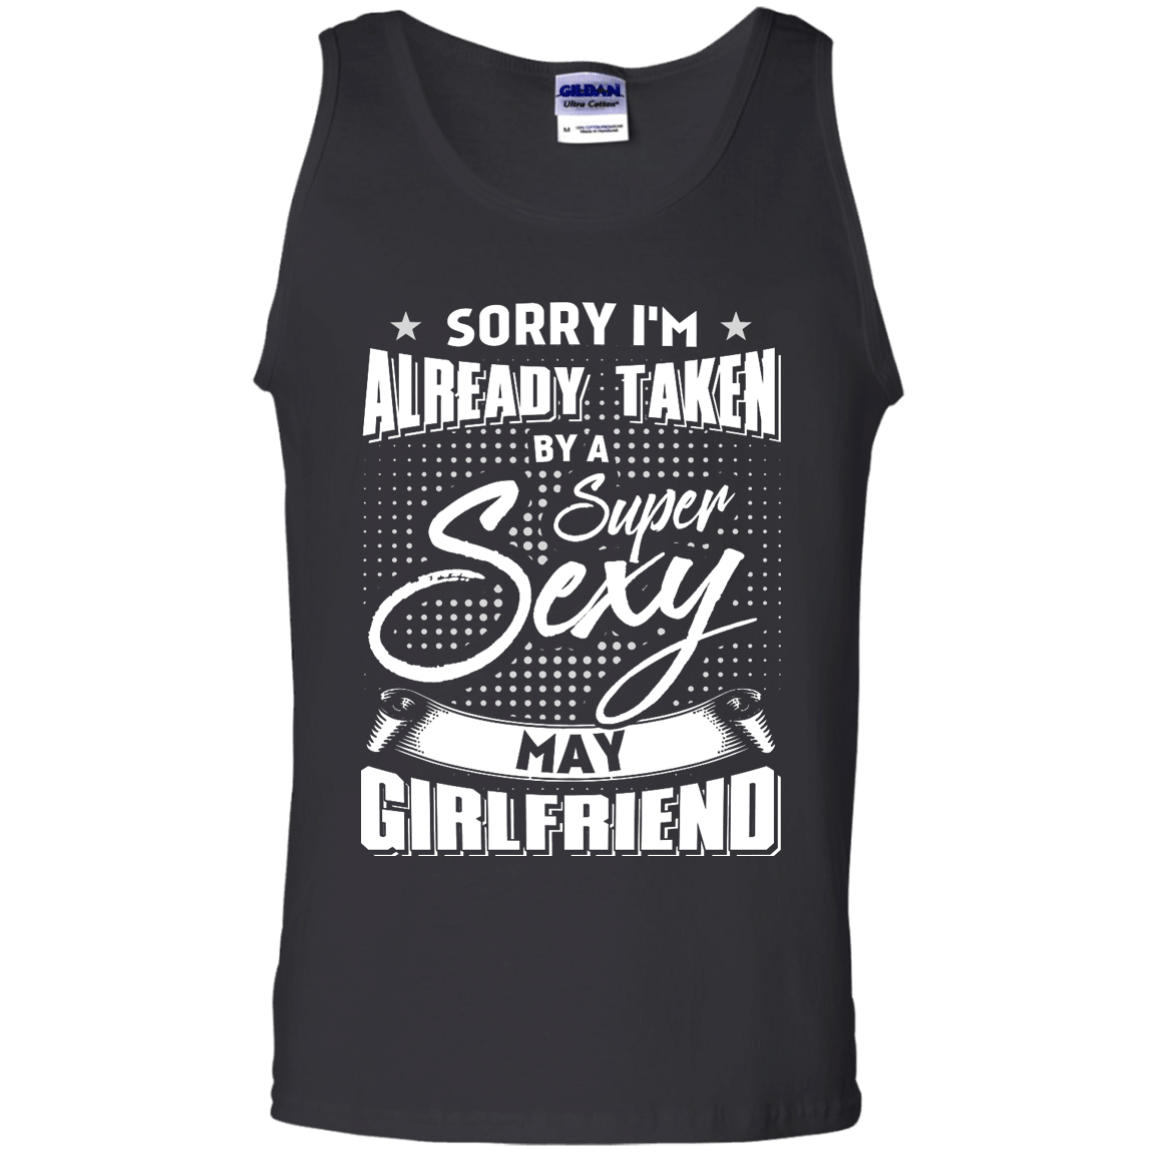 Sorry I M Already Taken By A Super Sexy May Girlfriend Shirt And Hoodie